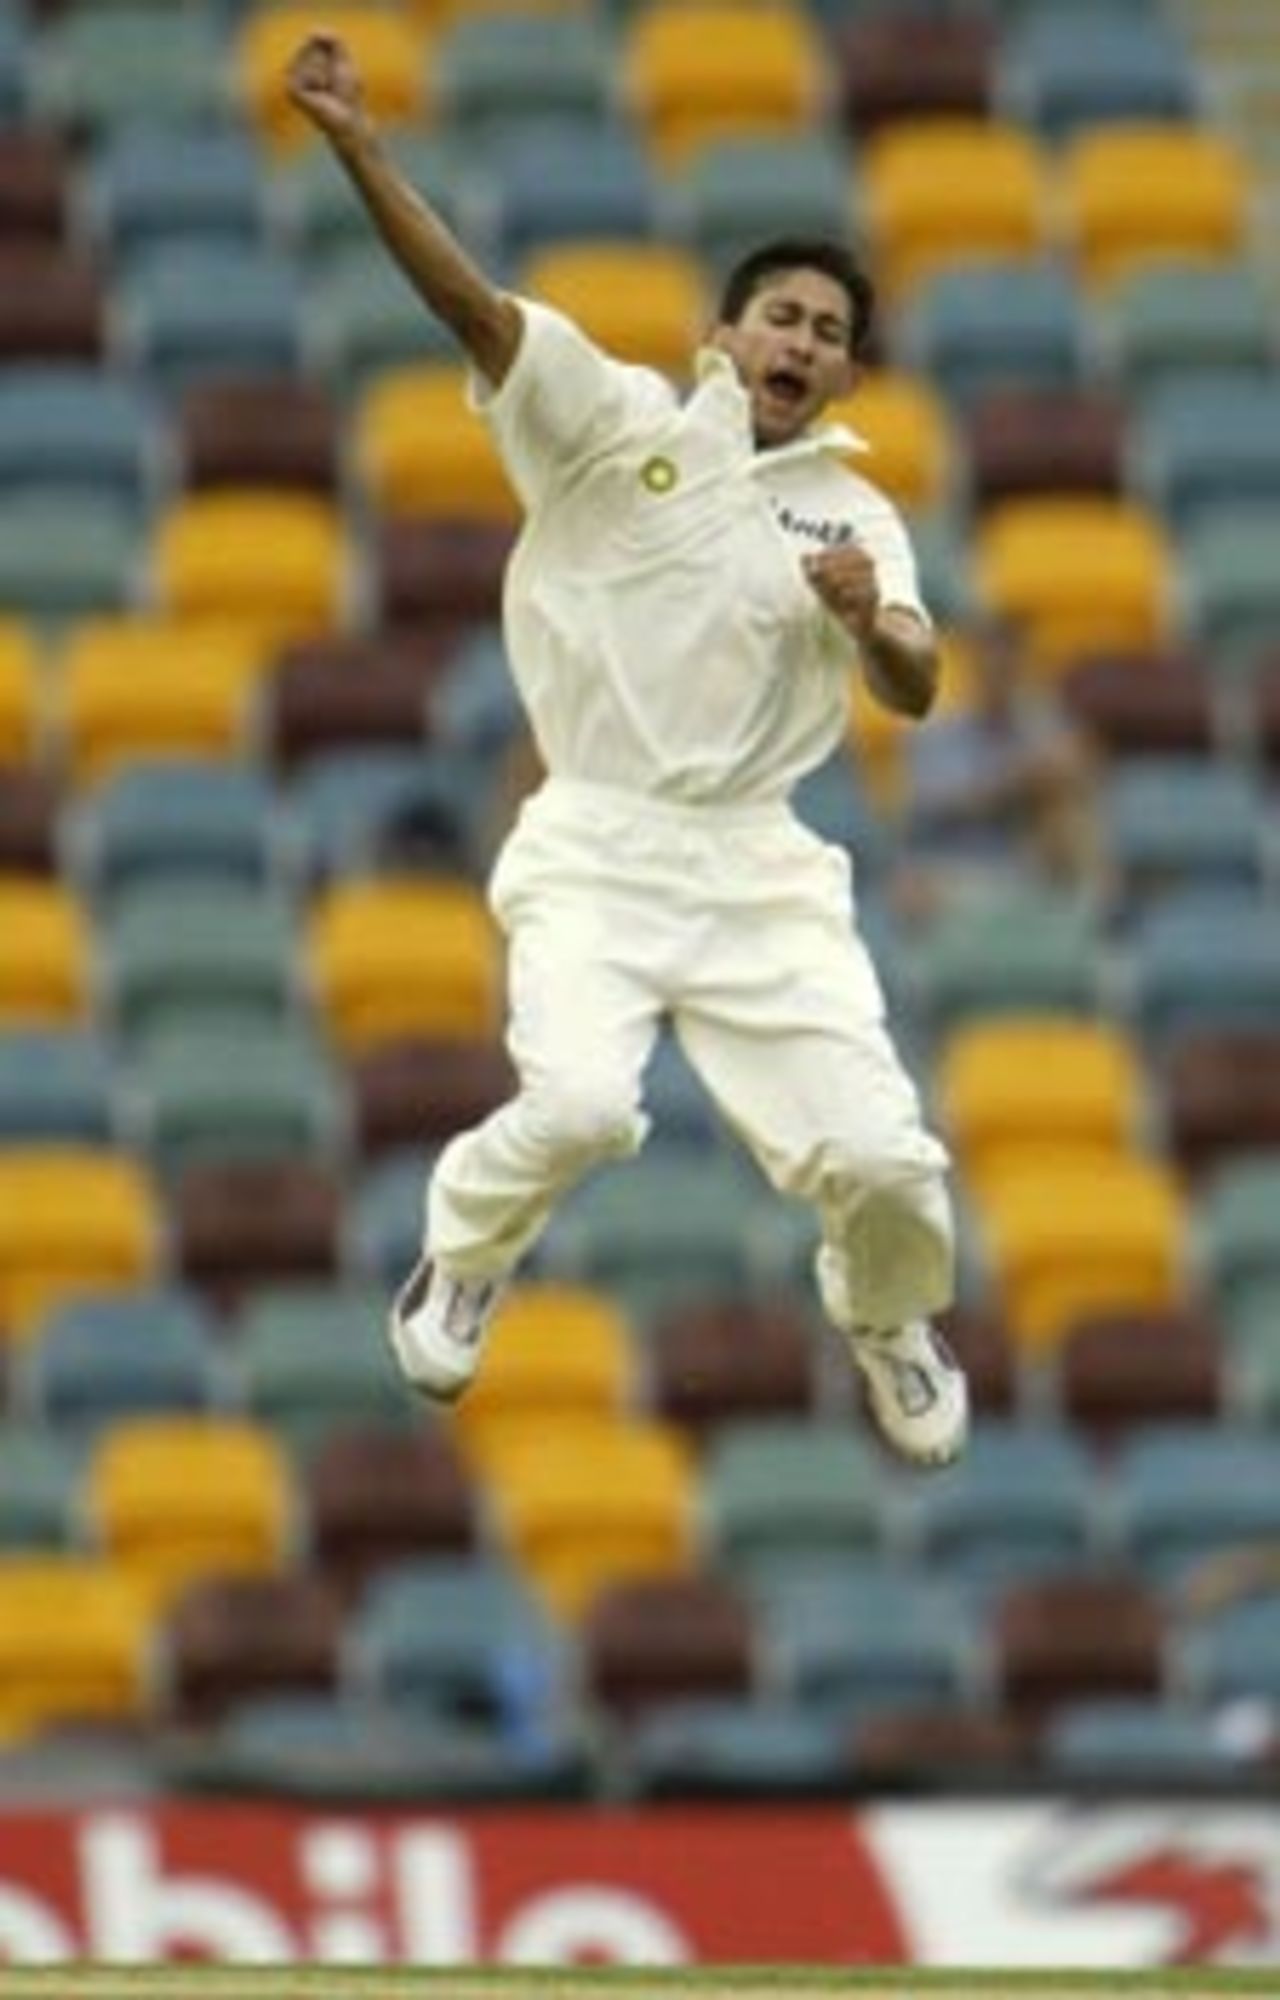 Ajit Agarkar lifts his body after lifting his game - here, he celebrates the dismissal of Andy Bichel, Australia v India, 1st Test, Brisbane, 2nd day, December 5, 2003